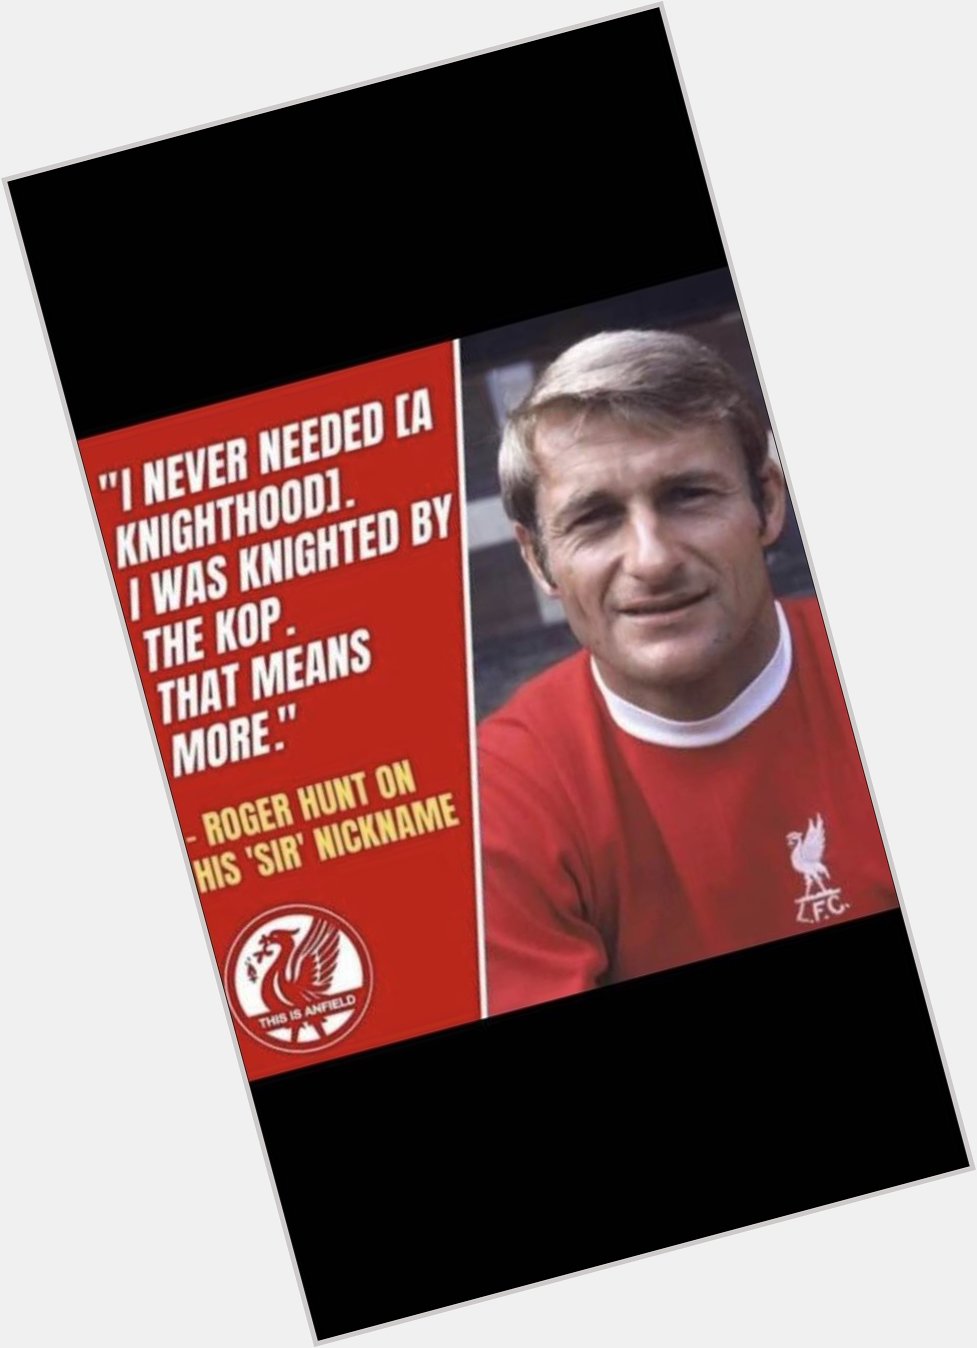  The late Roger Hunt was born on this day in 1938, Happy Birthday Roger R.I.P - YNWA. 